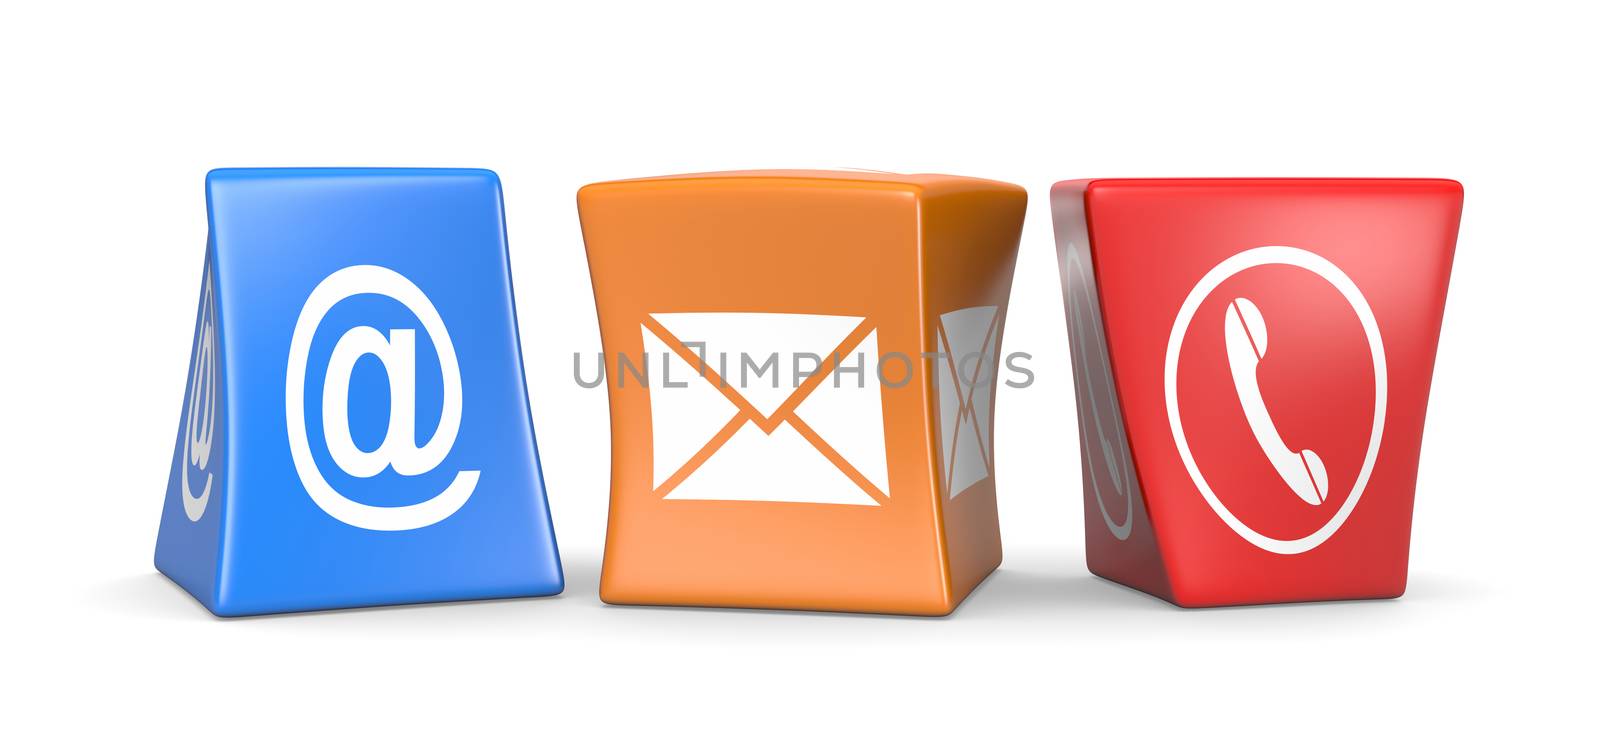 Contact Us Funny Cubes Set on White Background